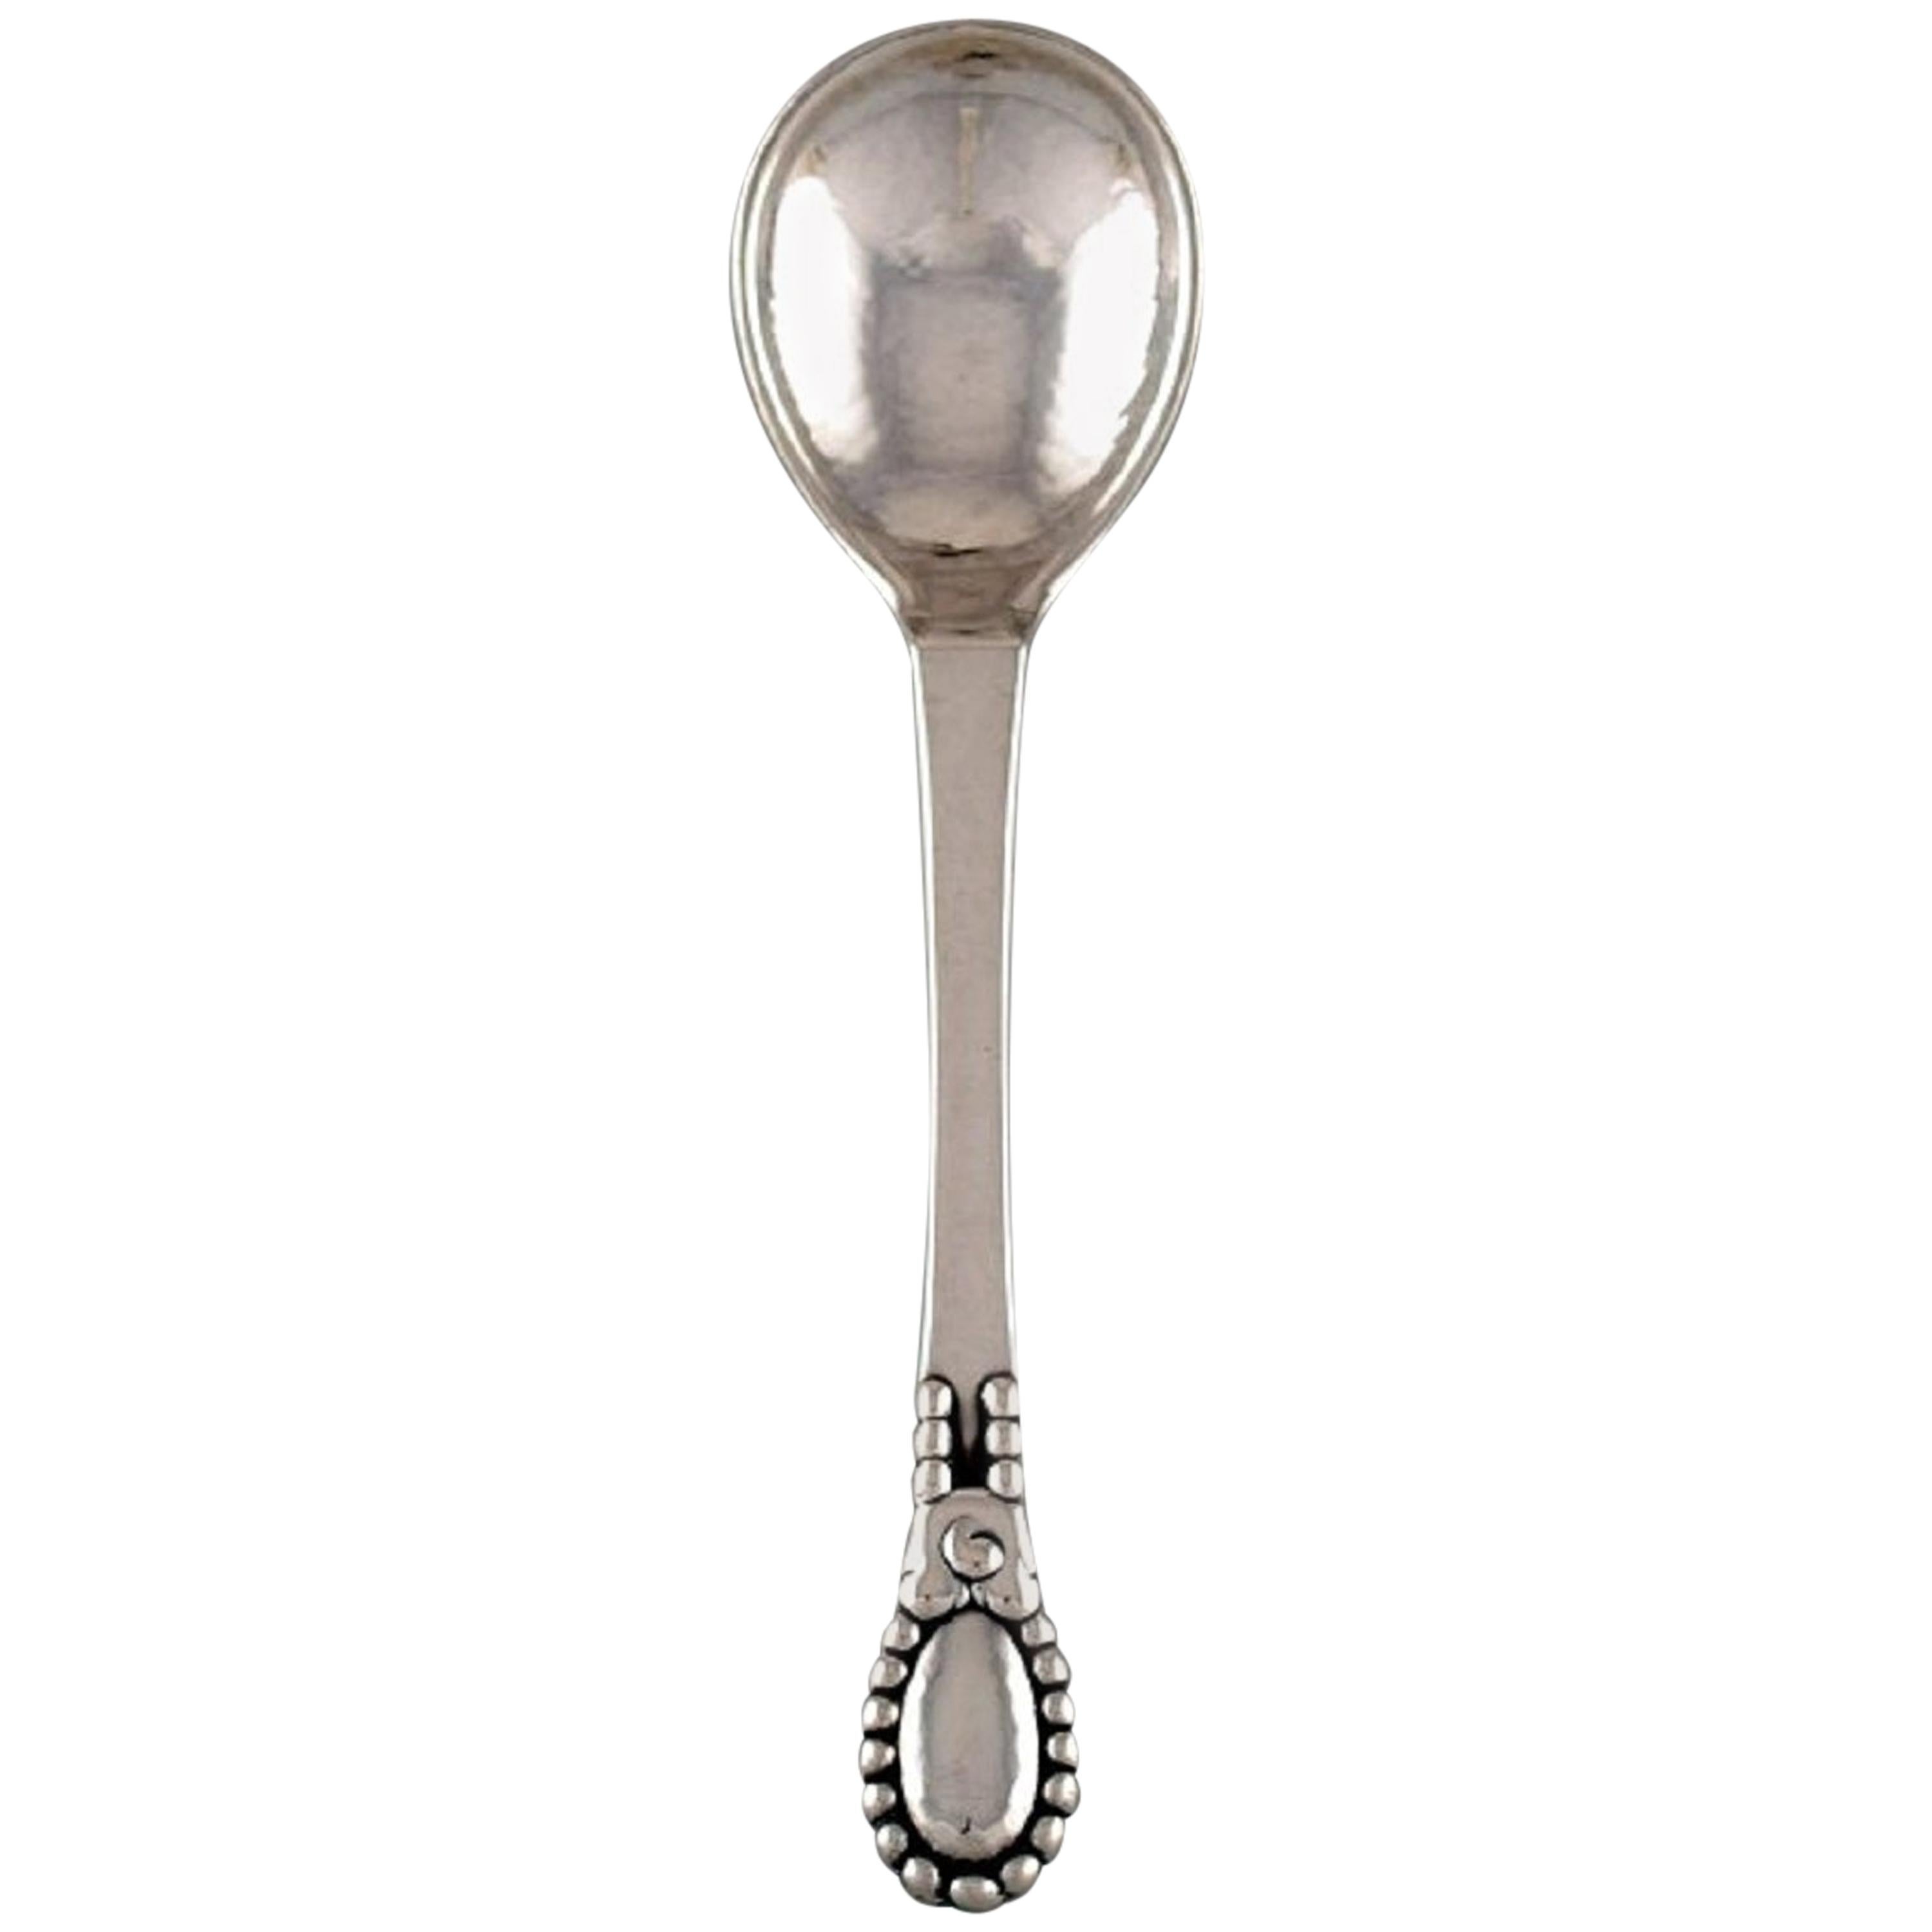 Evald Nielsen Number 13 Jam Spoon in Hammered Silver, 830, Dated 1924 For Sale